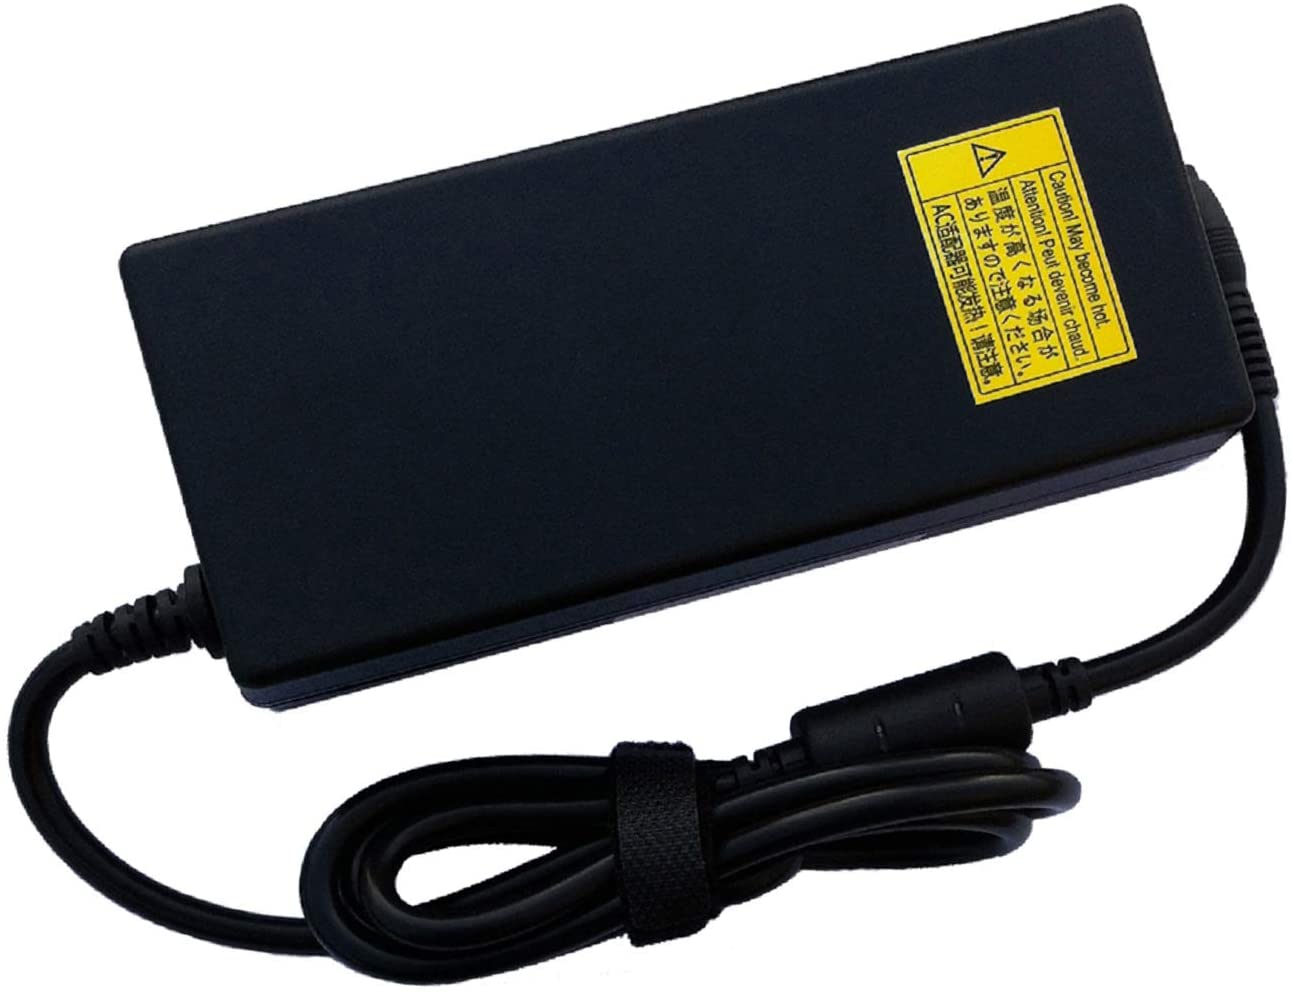 UPBRIGHT NEW AC / DC Adapter For Panasonic CF-532JCZYCM CF-532LCZACM CF-532ALP8CM CF-532ALZACM Toughbook i5-4310U Power Supply Cord Cable PS Charger PSU - image 2 of 5